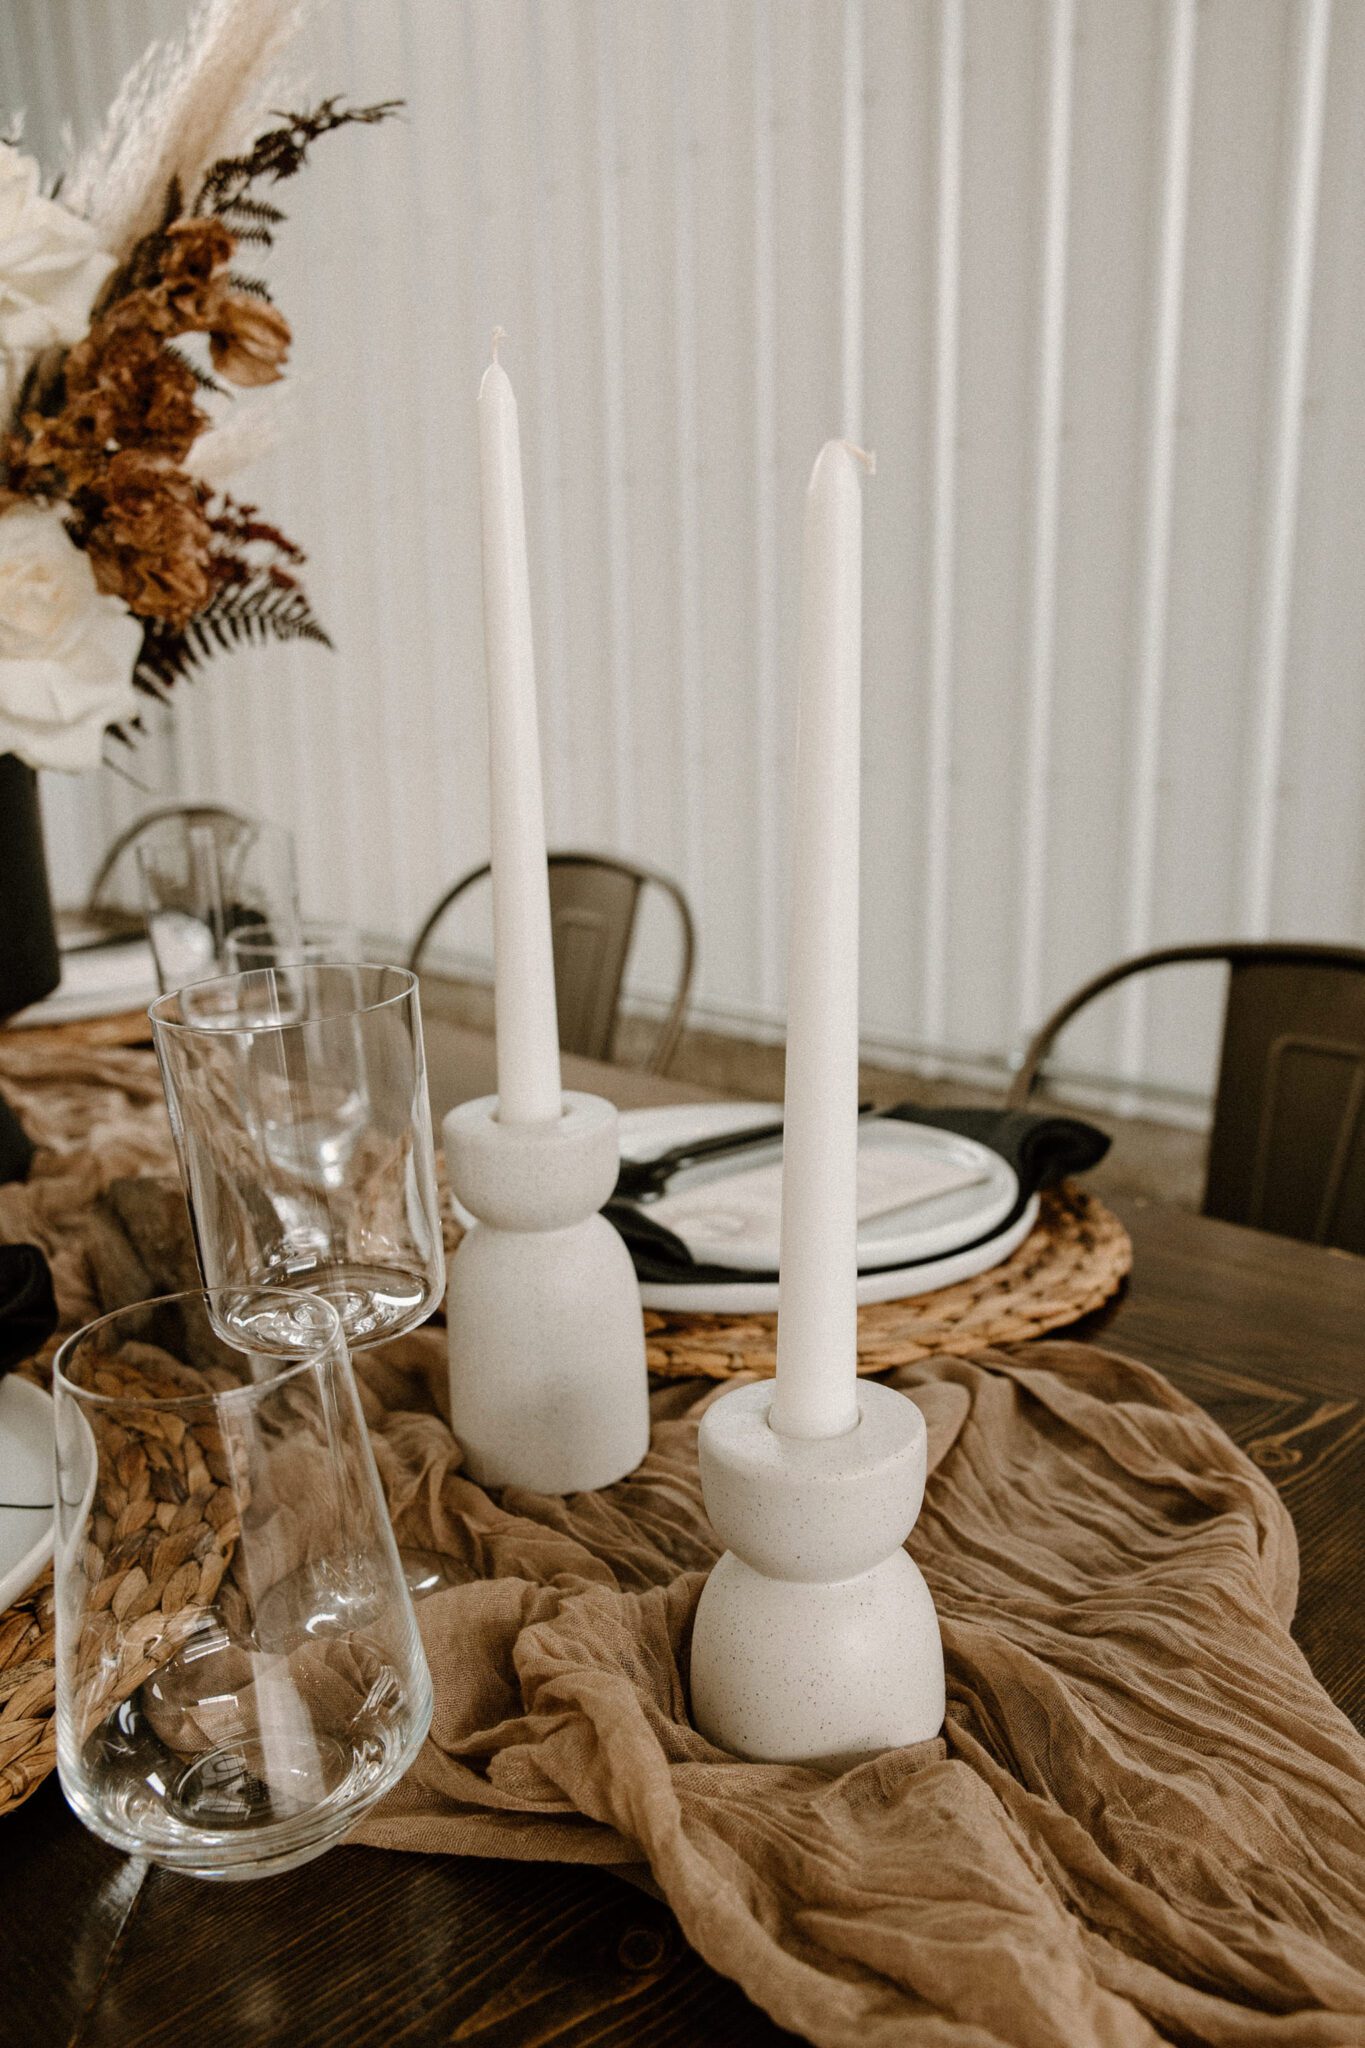 Rich brown textures and tones featured in this tablescape at 52 North Venue, featuring cream-coloured taper candles, warm and moody wedding inspiration. 